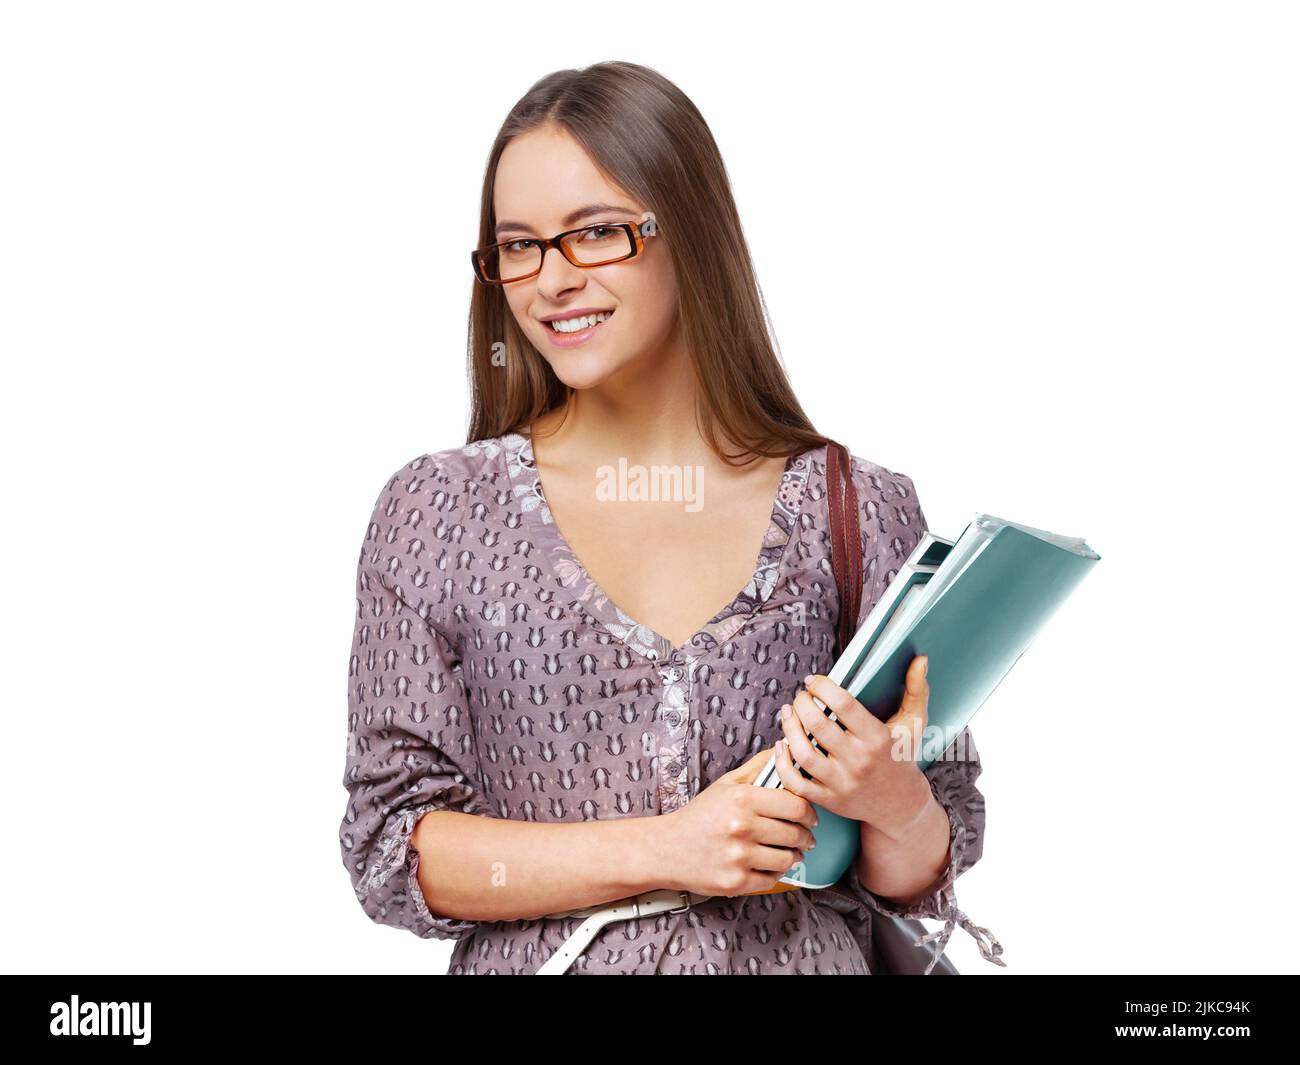 Beautiful female student with books isolated on white background. Stock Photo